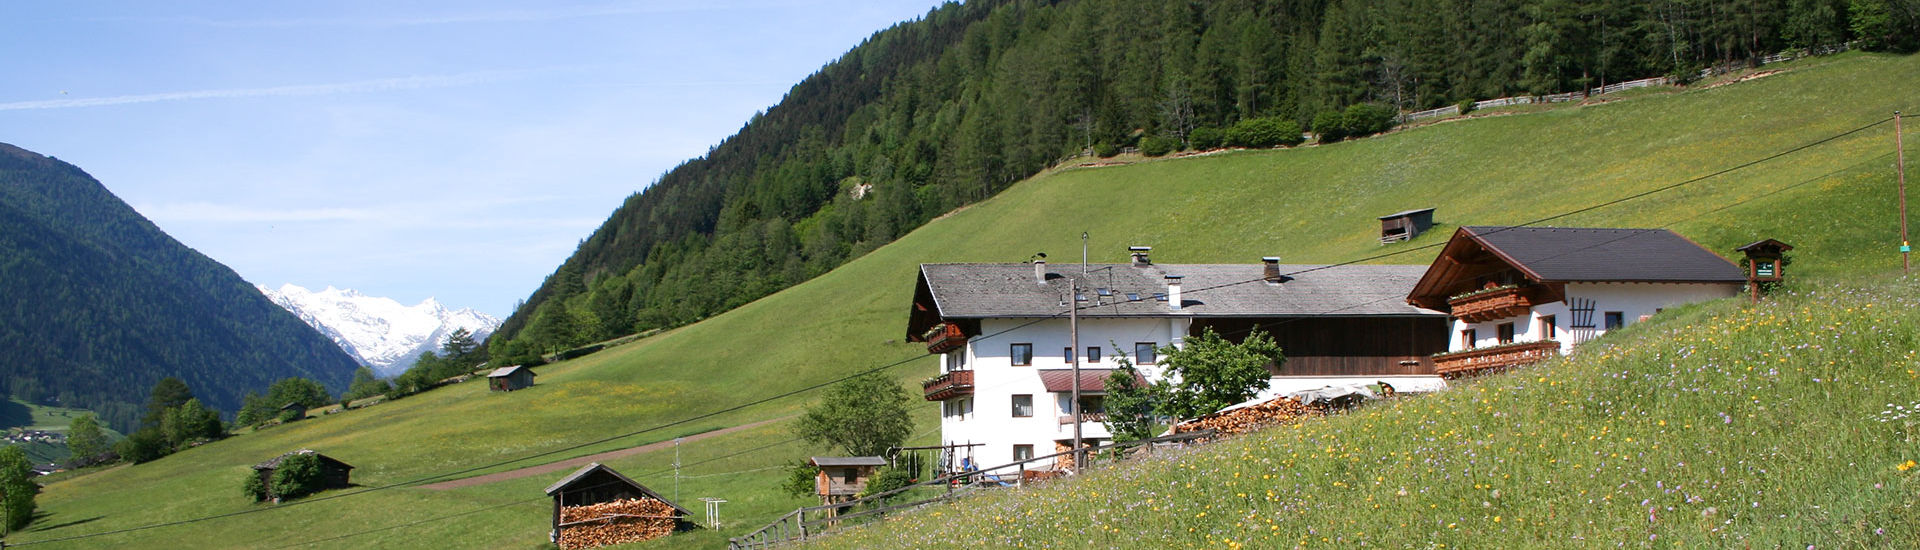 Impressions, Omesberger Hof in Neustift – a holiday in the Stubai Valley in Tyrol